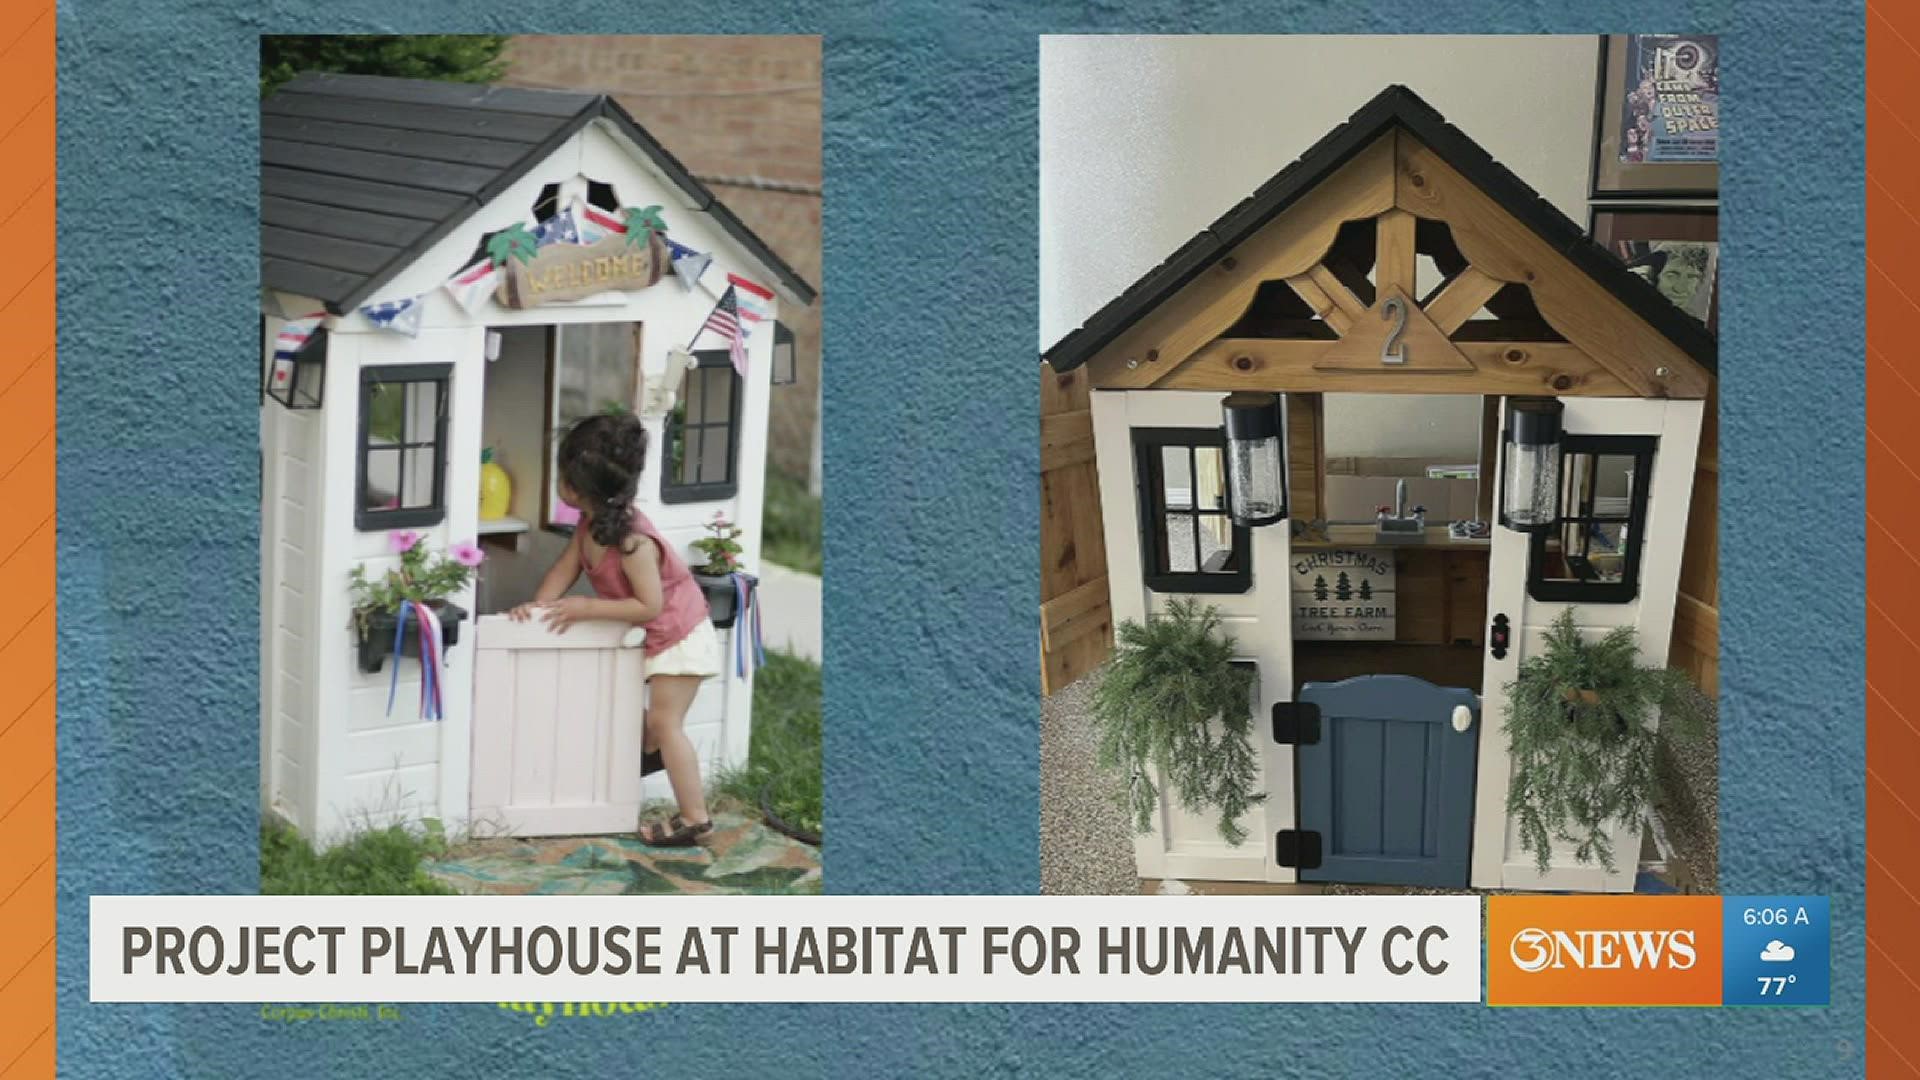 Project Playhouse is meant to teach kids the joys of homeownership at a young age.